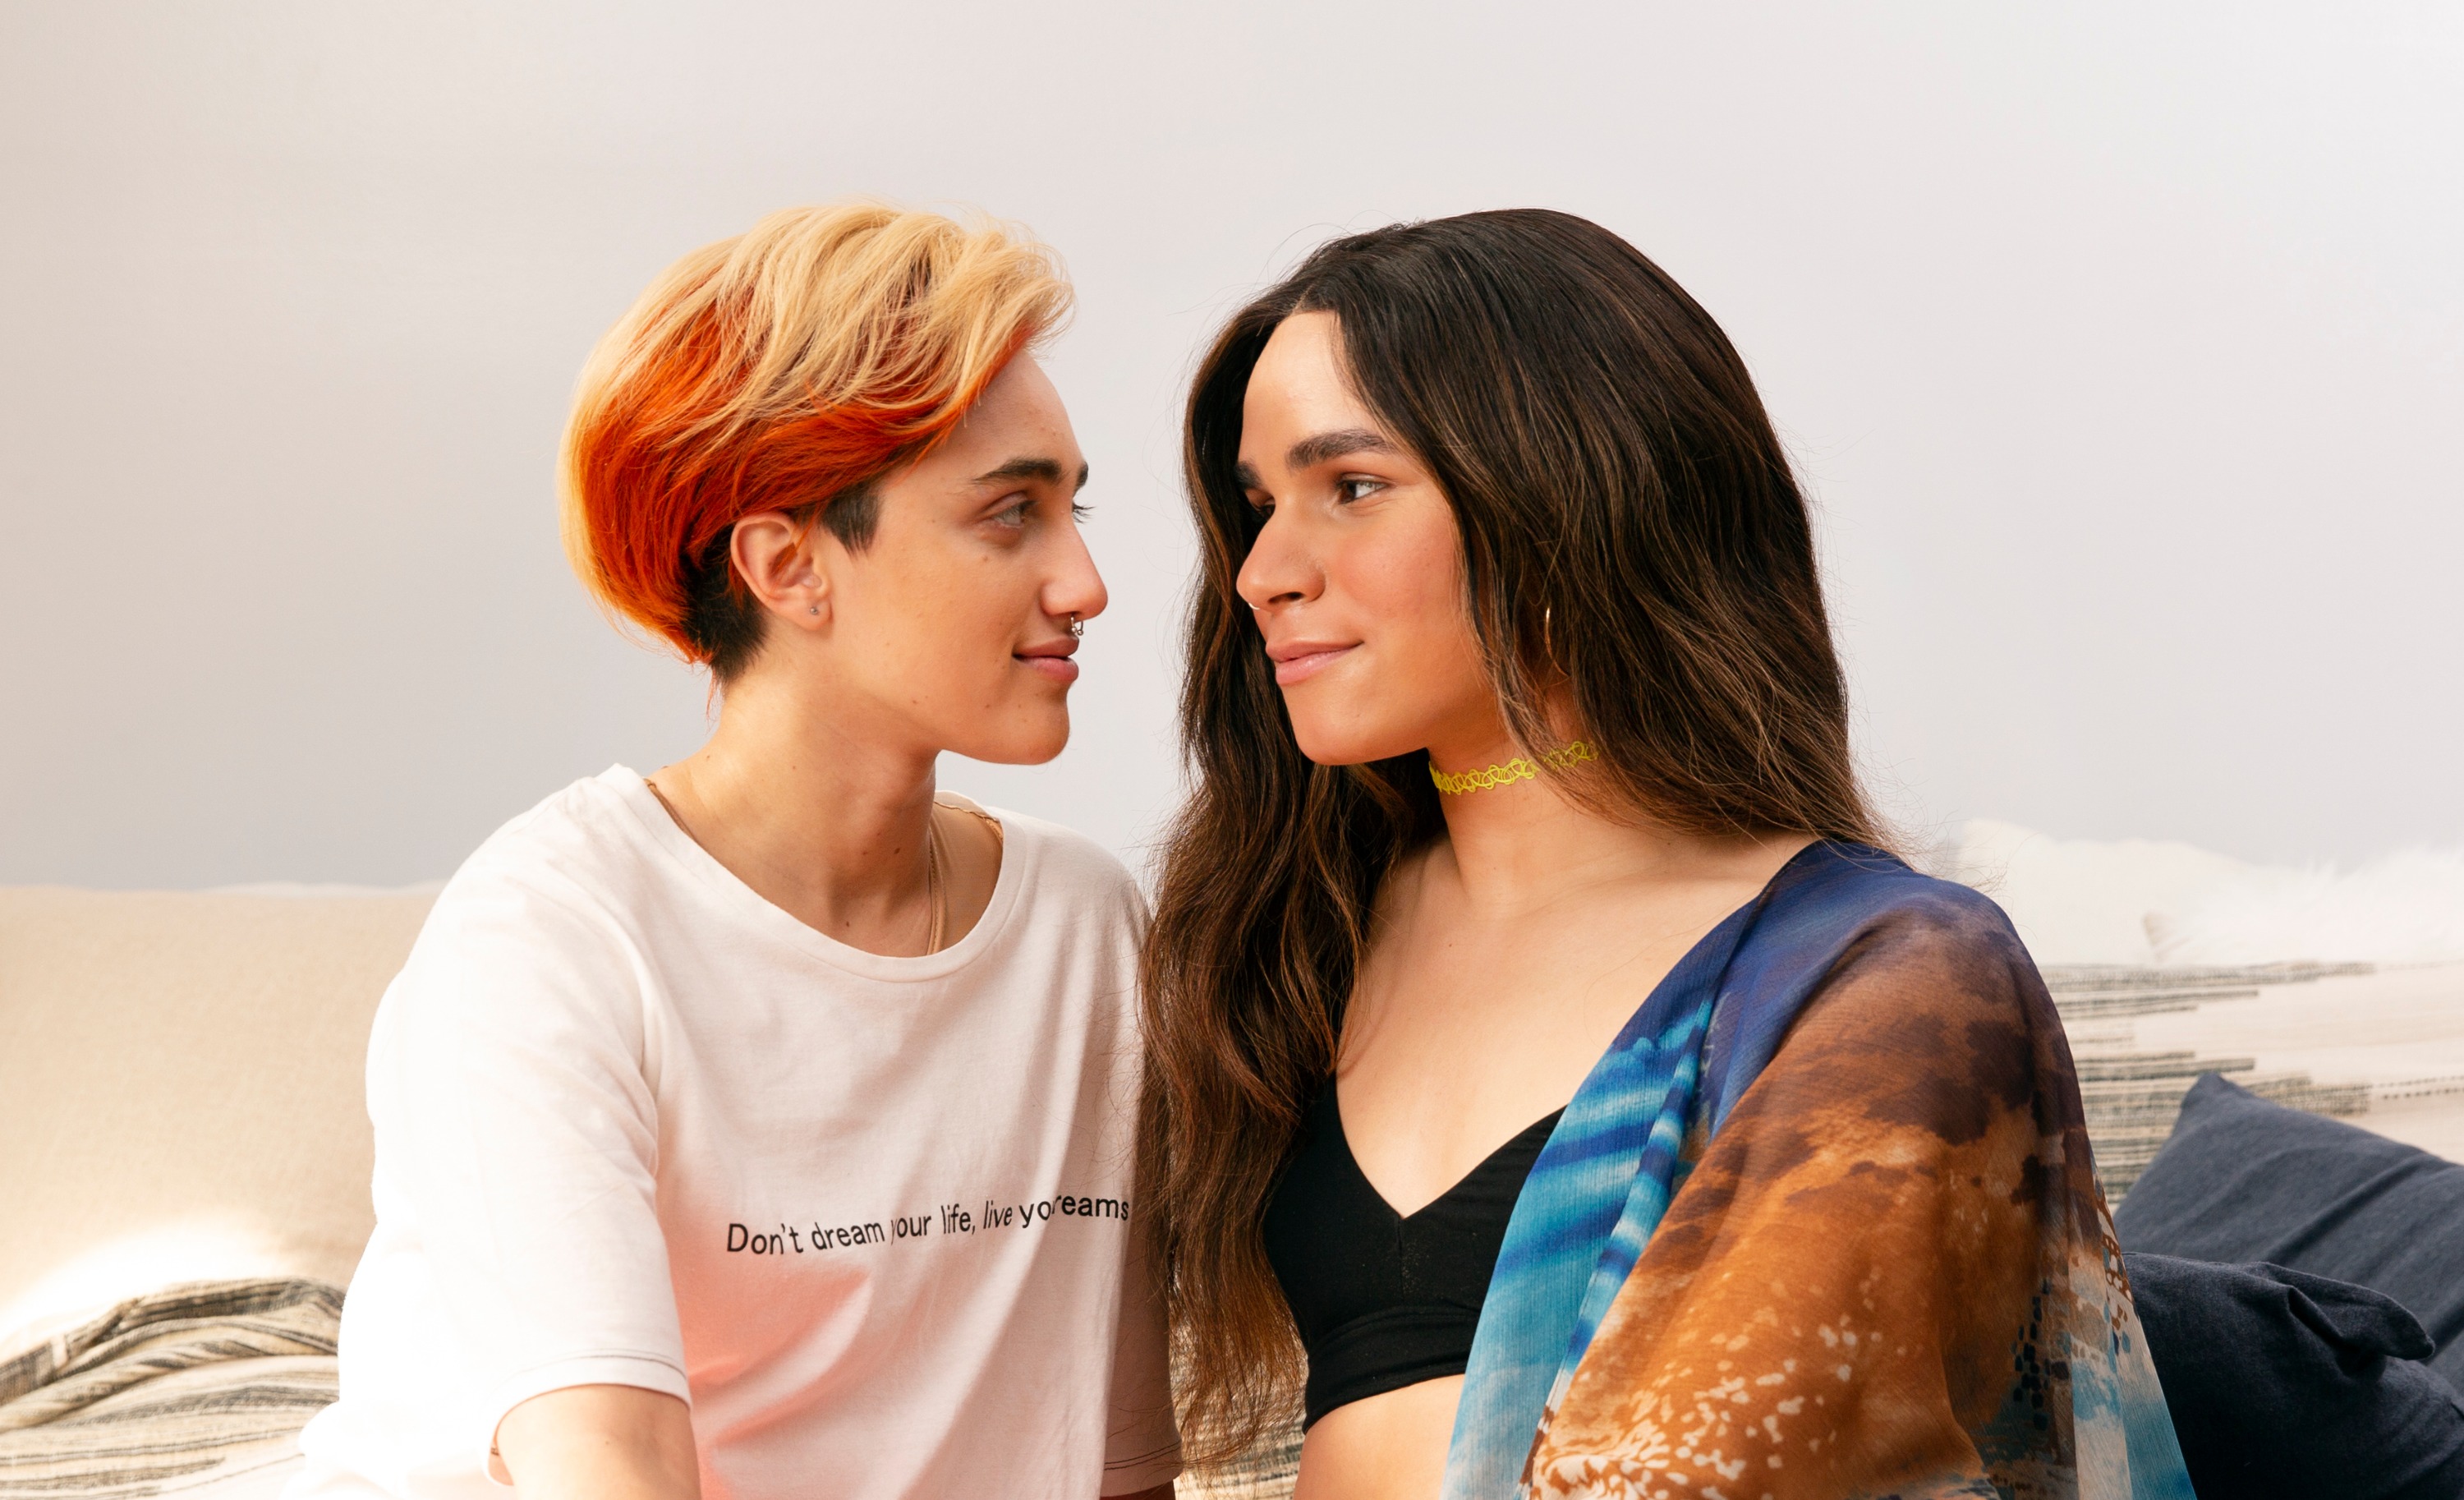 A transmasculine gender-nonconforming person and transfeminine non-binary person looking in each others eyes